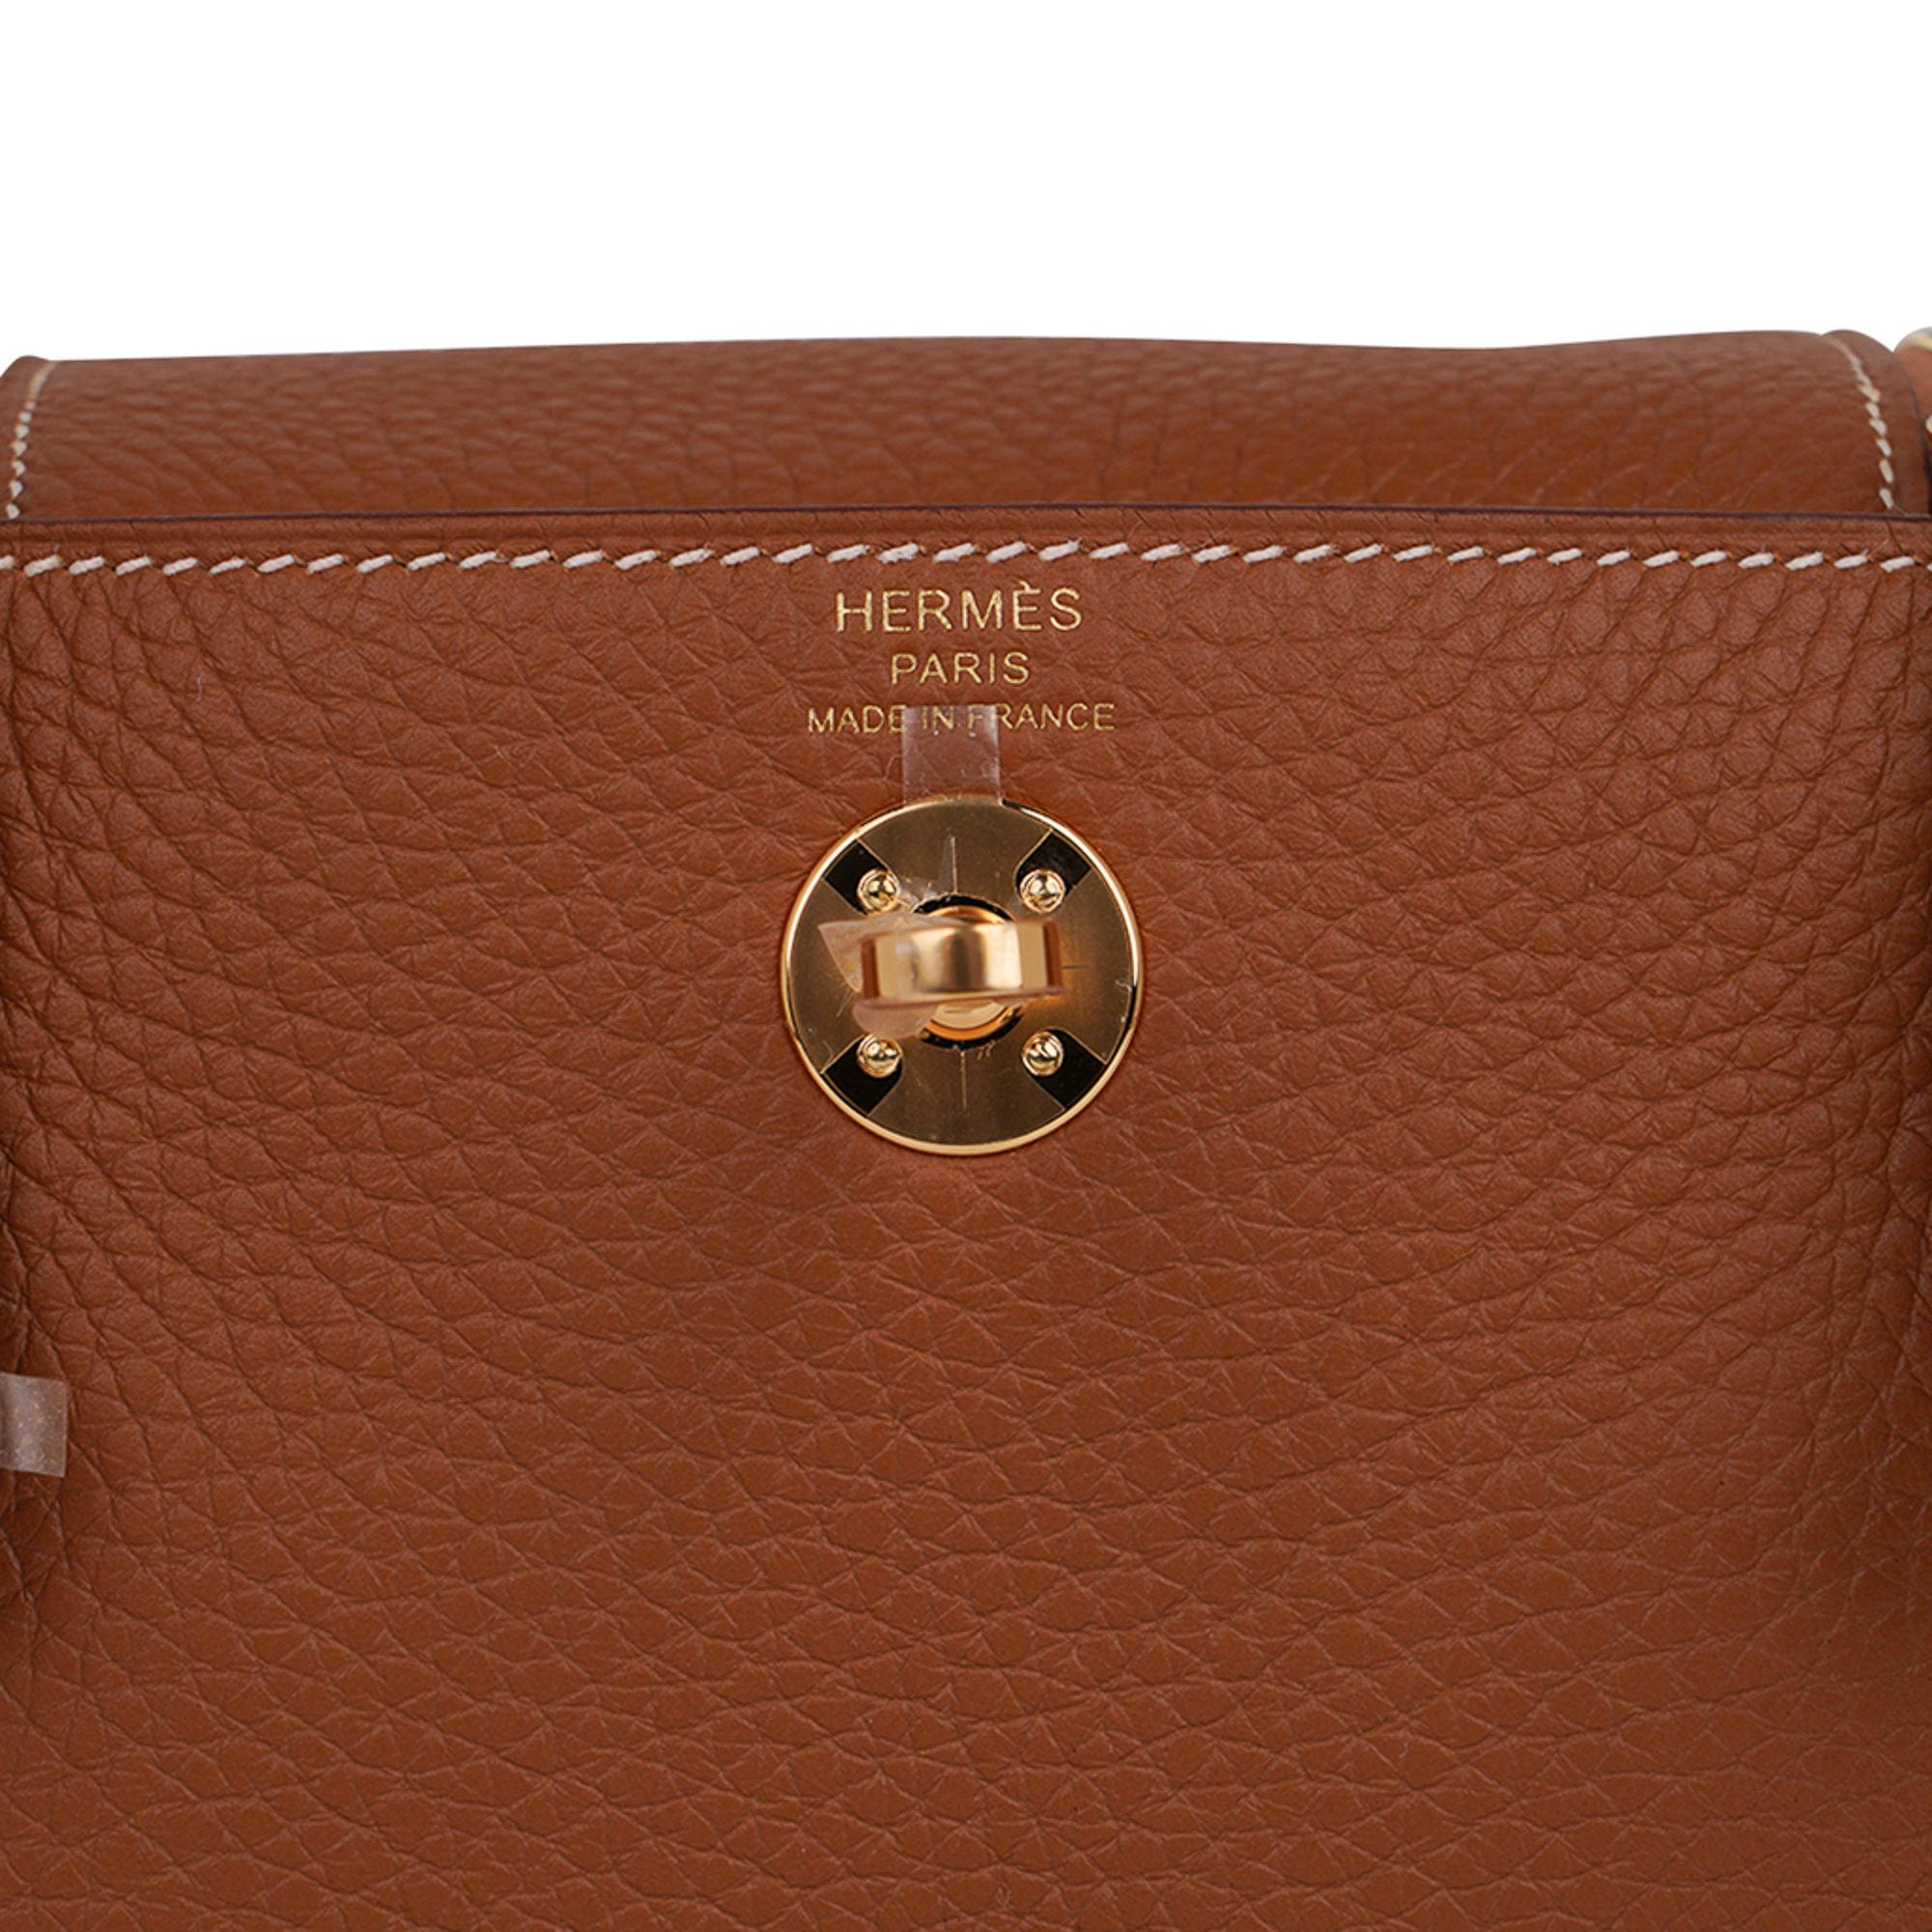 HERMÈS, DEEP BLUE MINI LINDY OF CLEMENCE LEATHER WITH GOLD HARDWARE, Handbags & Accessories, 2020